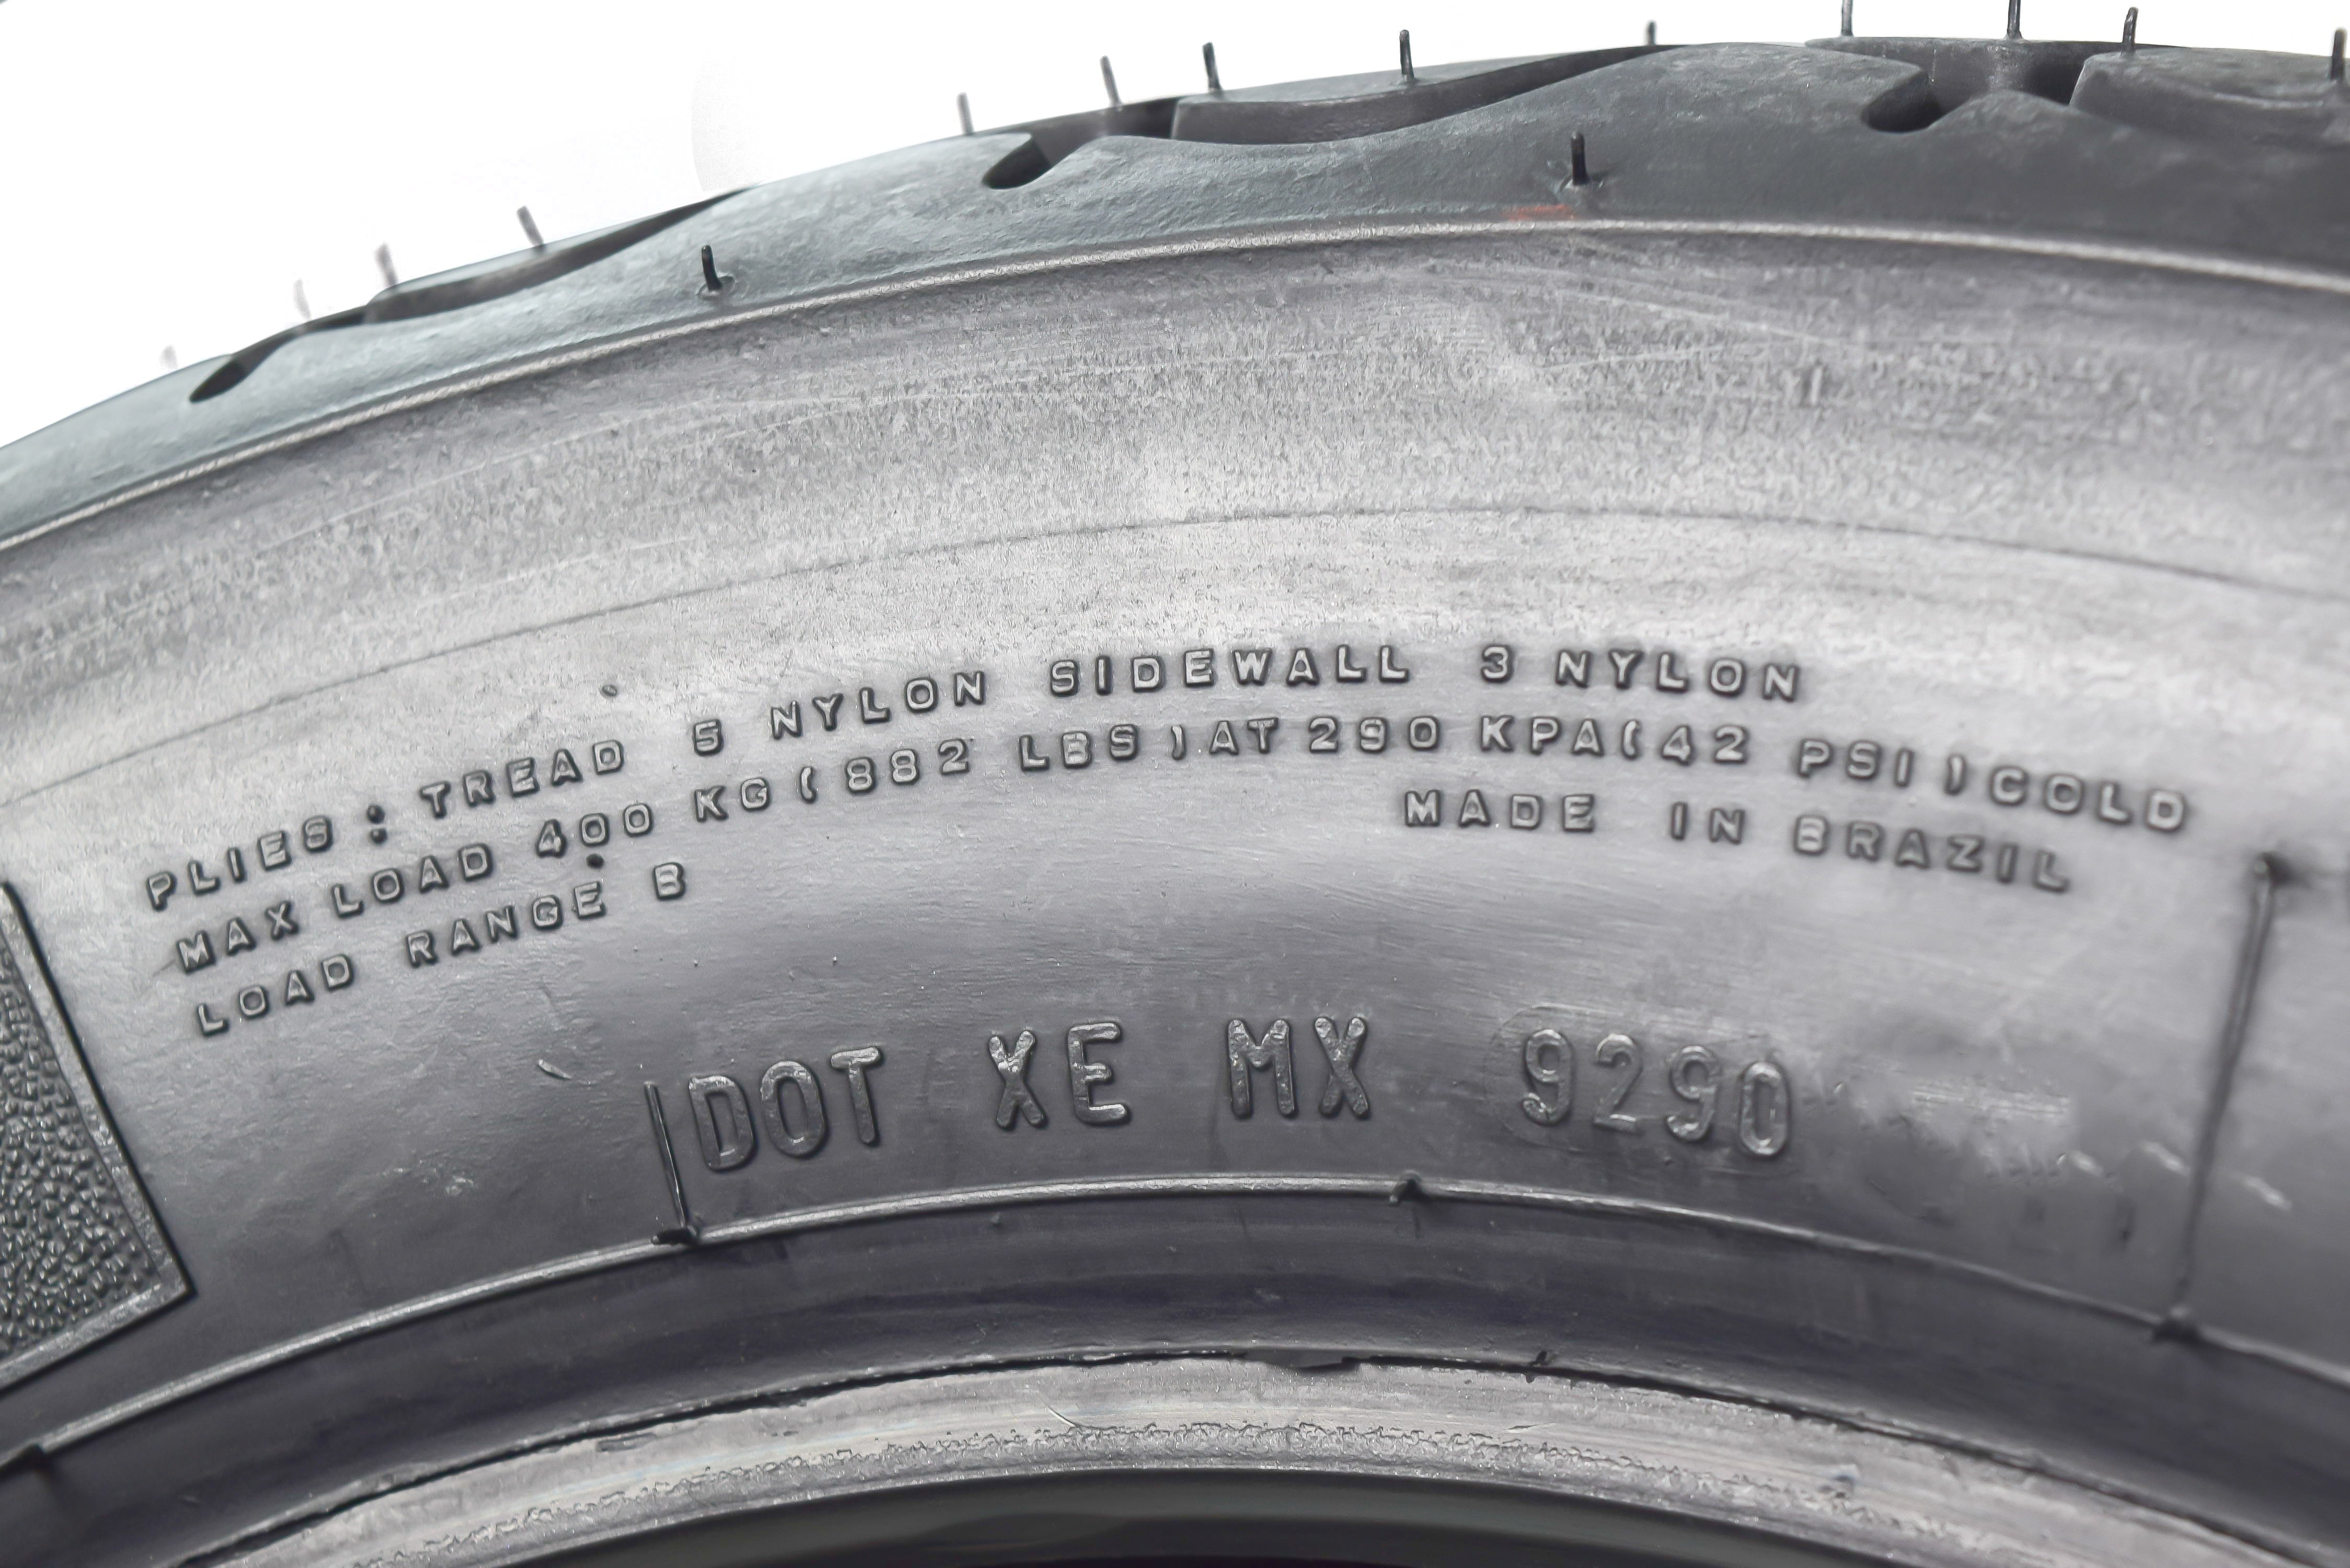 Pirelli-MT-66-Route-1003300-130-90-15-M-C-66S-Rear-Motorcycle-Cruiser-Tire-image-5